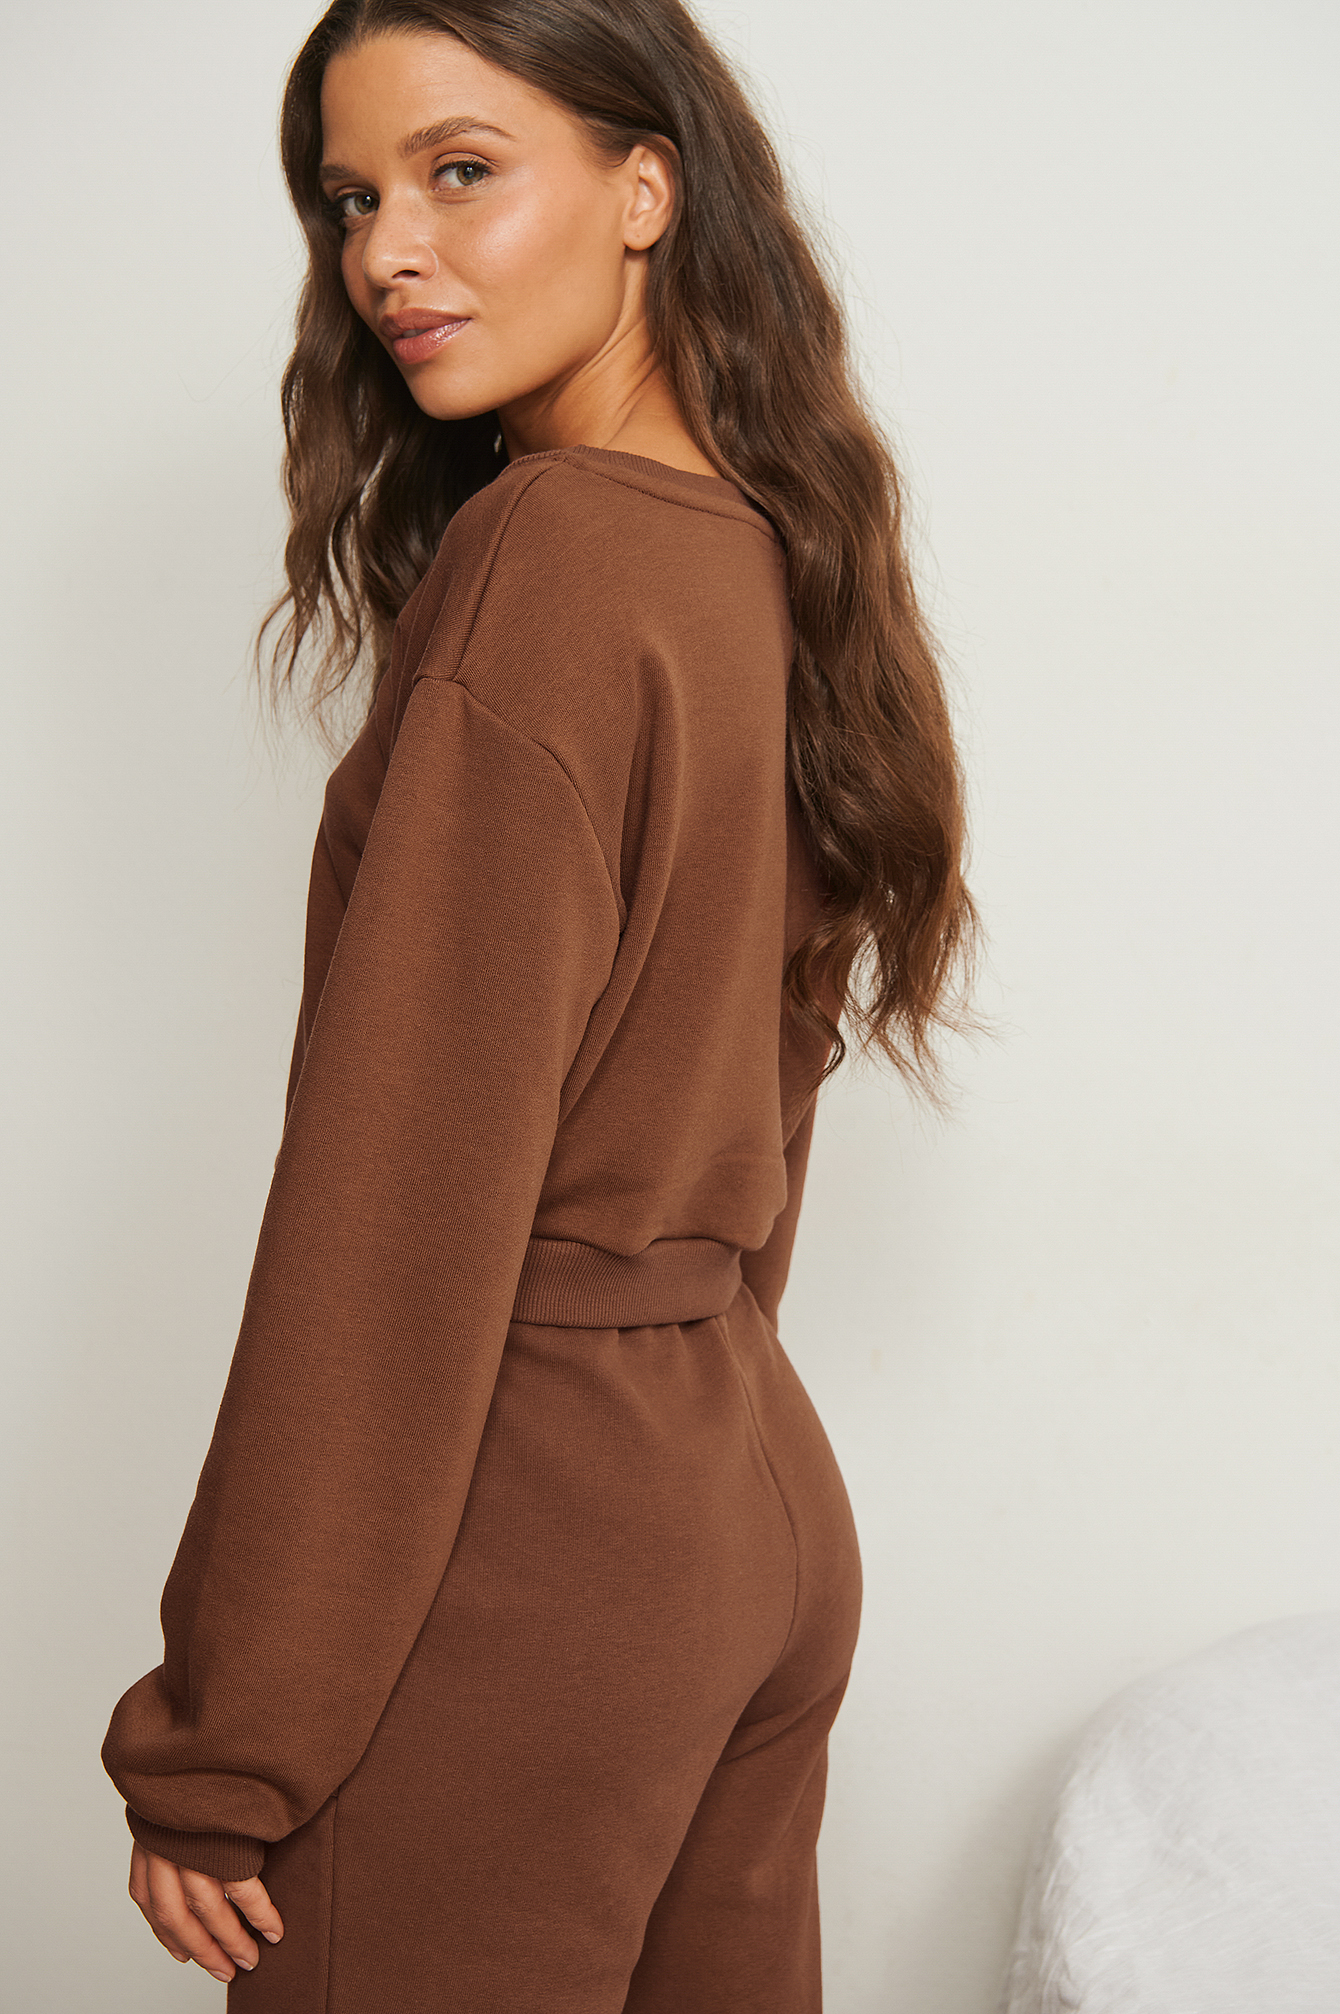 Brown Cropped Sweater